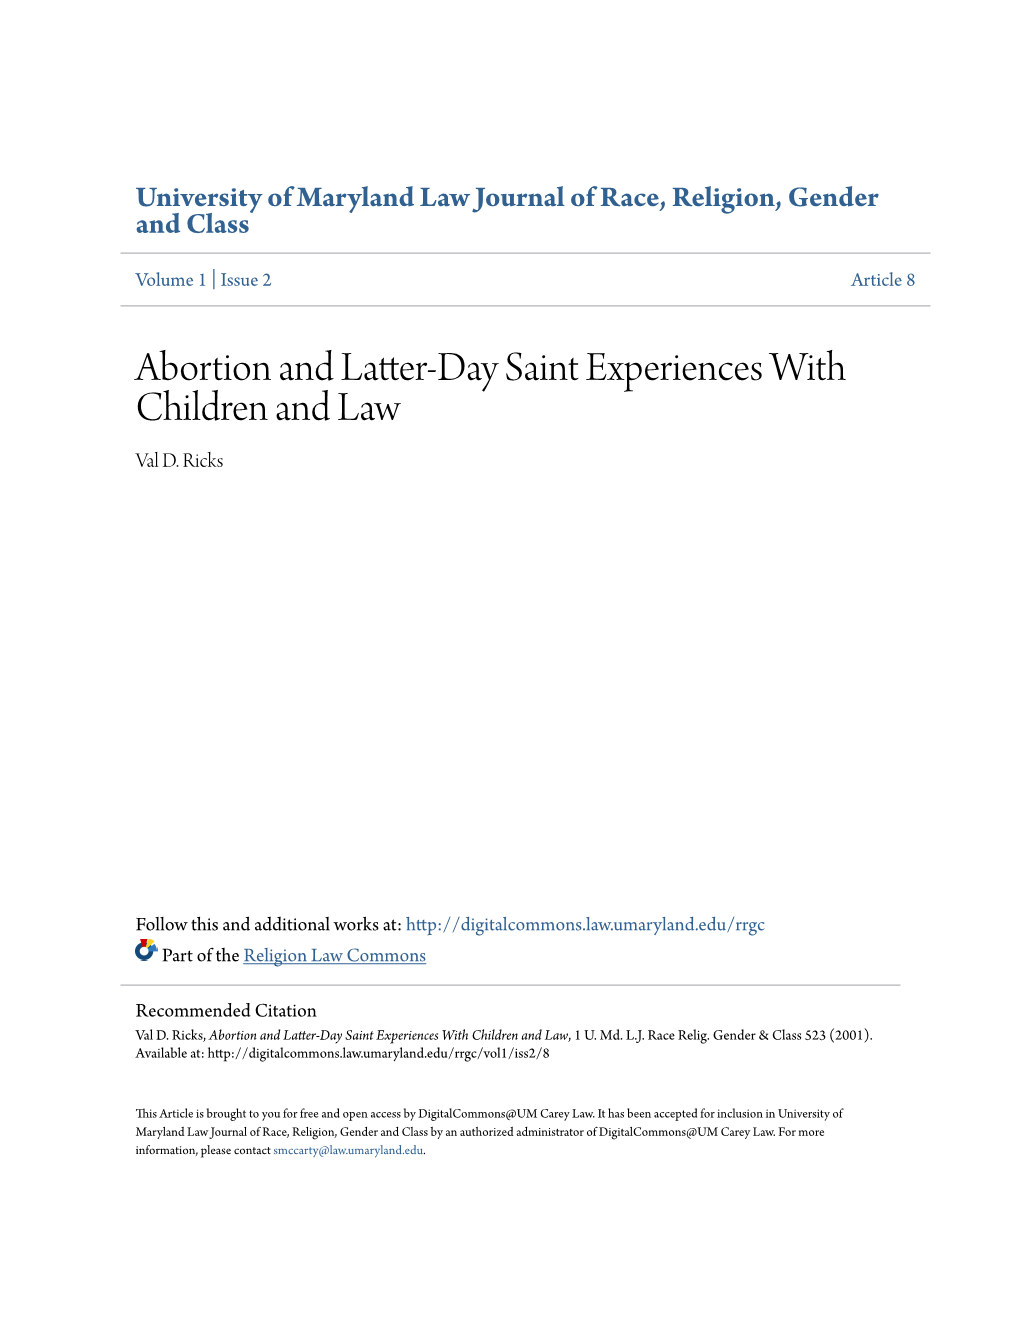 Abortion and Latter-Day Saint Experiences with Children and Law Val D